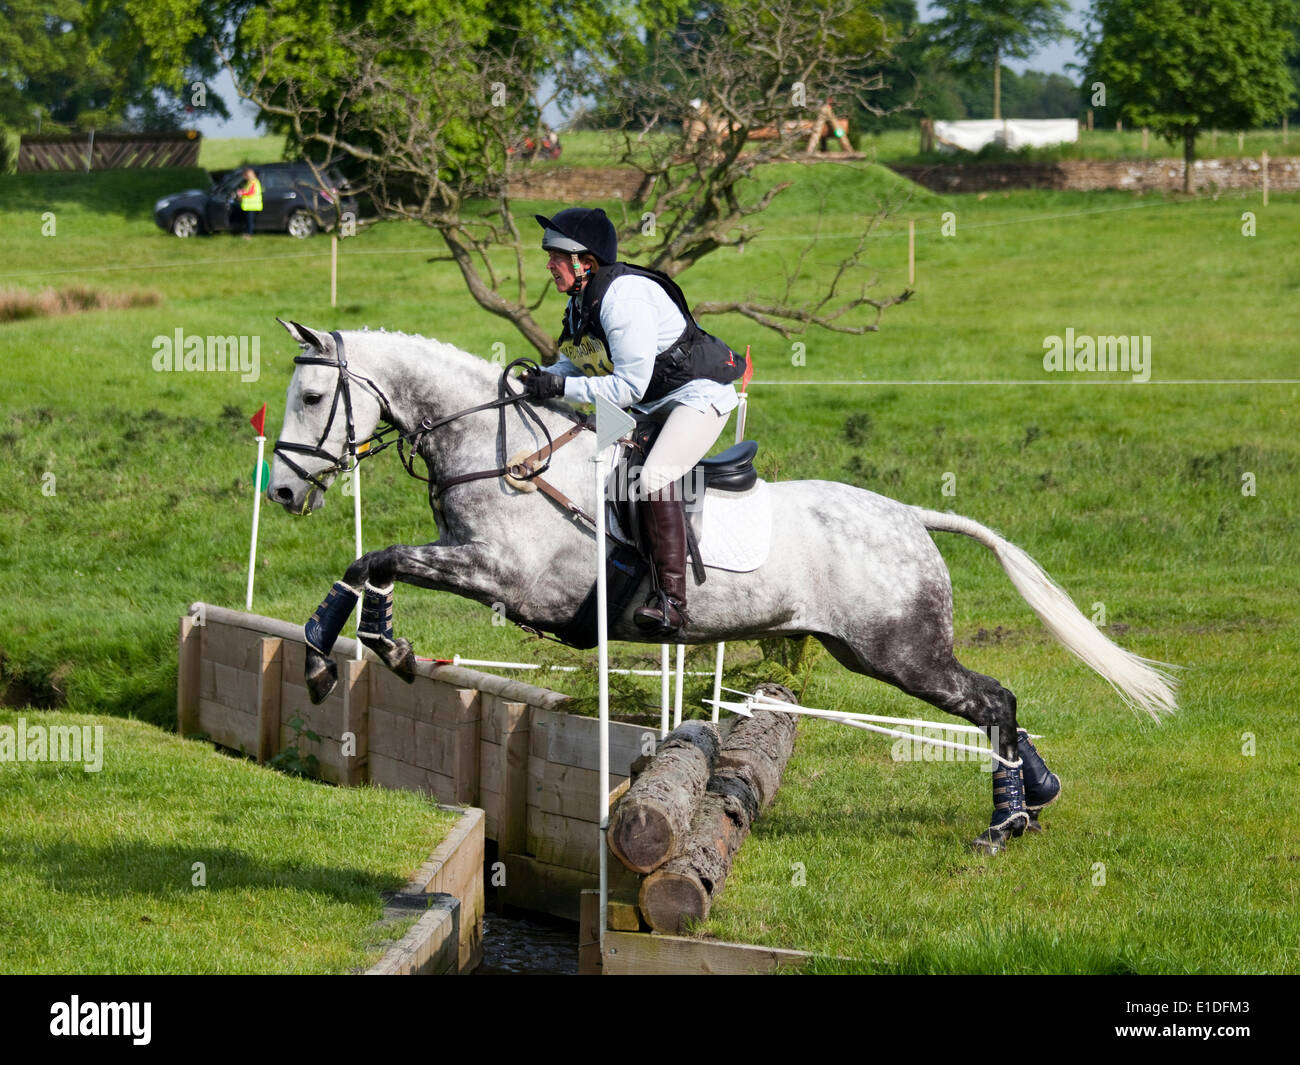 Belsay, England - May 31, 2014: A competitor in the cross country section clears the open ditch during the 2014 Belsay Horse Trials, held for the second year running in the grounds of Belsay Castle in Northumberland, England. Belsay Castle is managed by English Heritage and is open to the public all year. Stock Photo